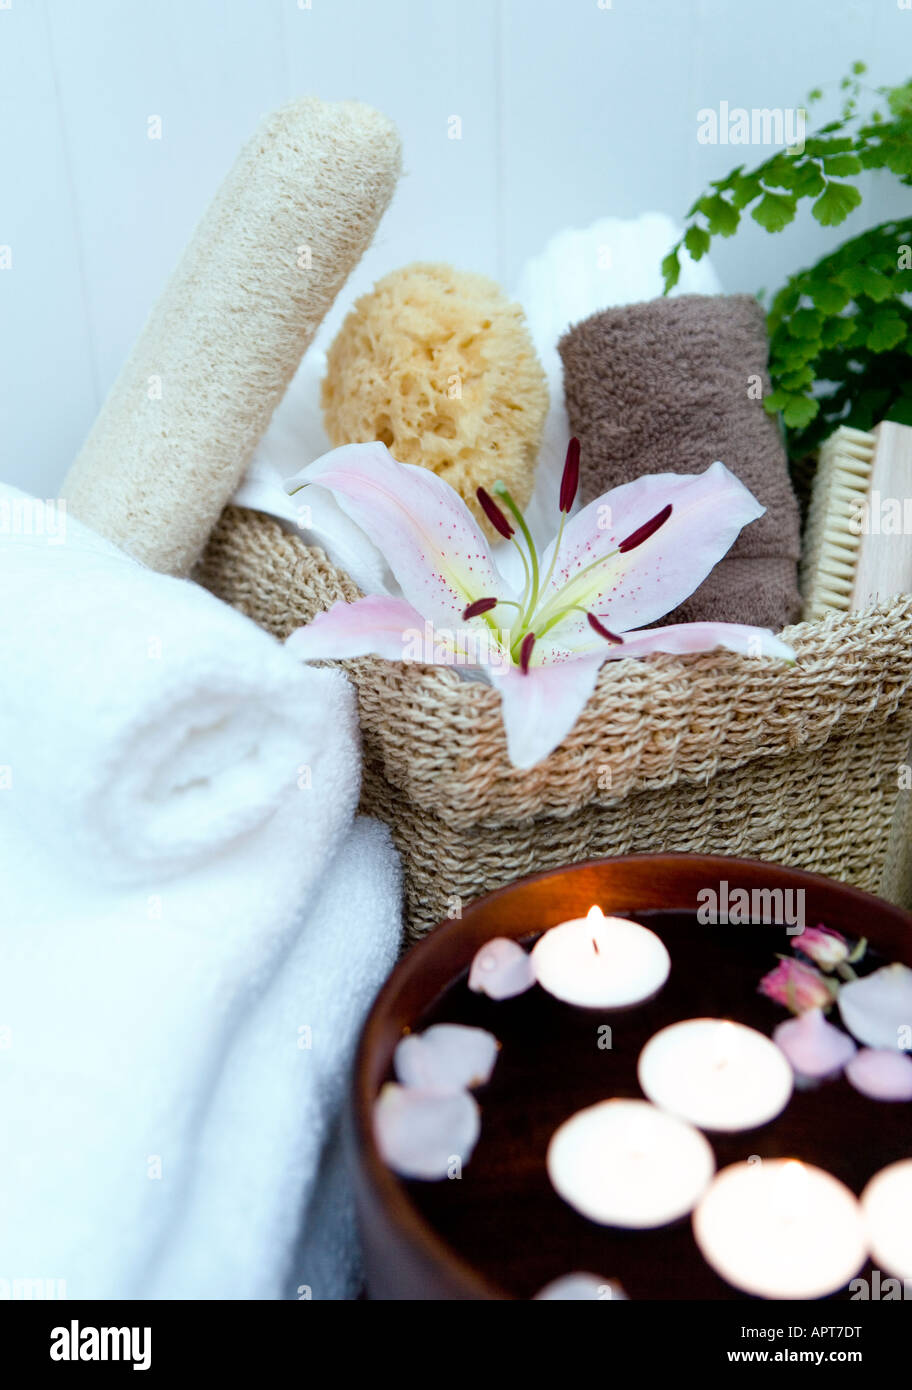 Spa setting with floating candles and rose petals, a basket filled with spa products including natural sponges folded towels and Stock Photo